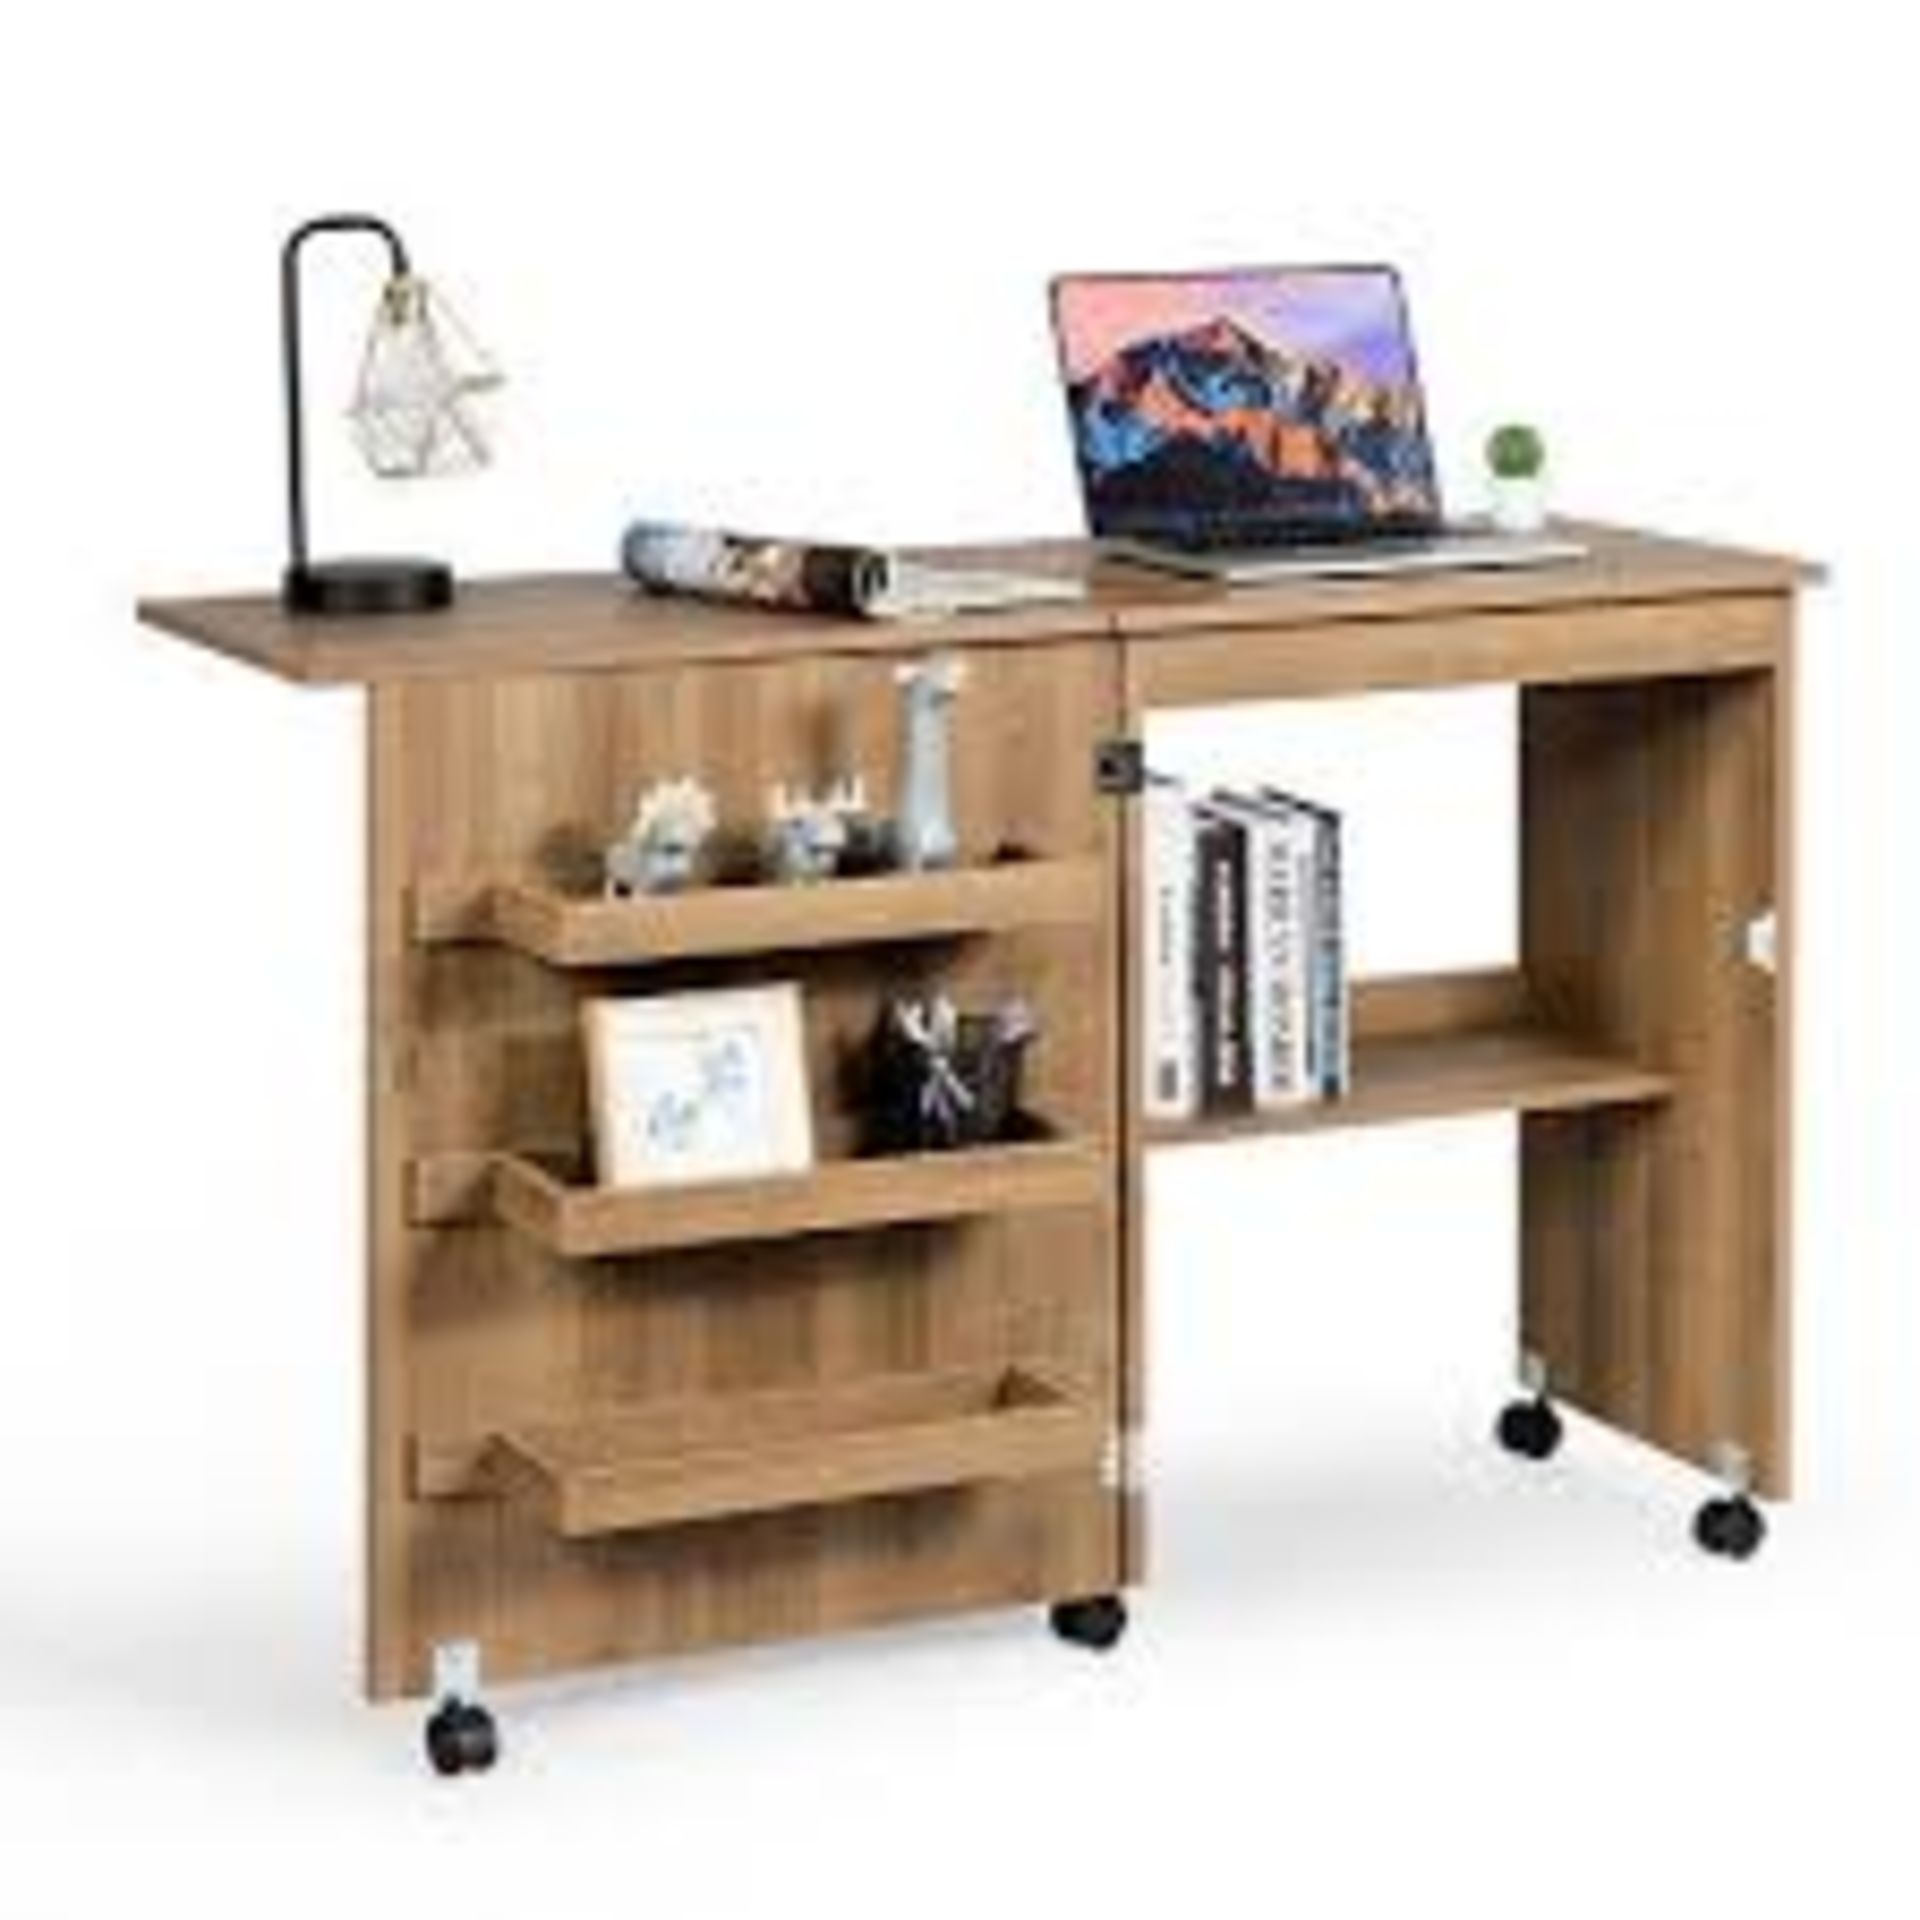 Folding Sewing Table 2 IN 1 Rolling Craft Table Home Office Desk. -R14.15.